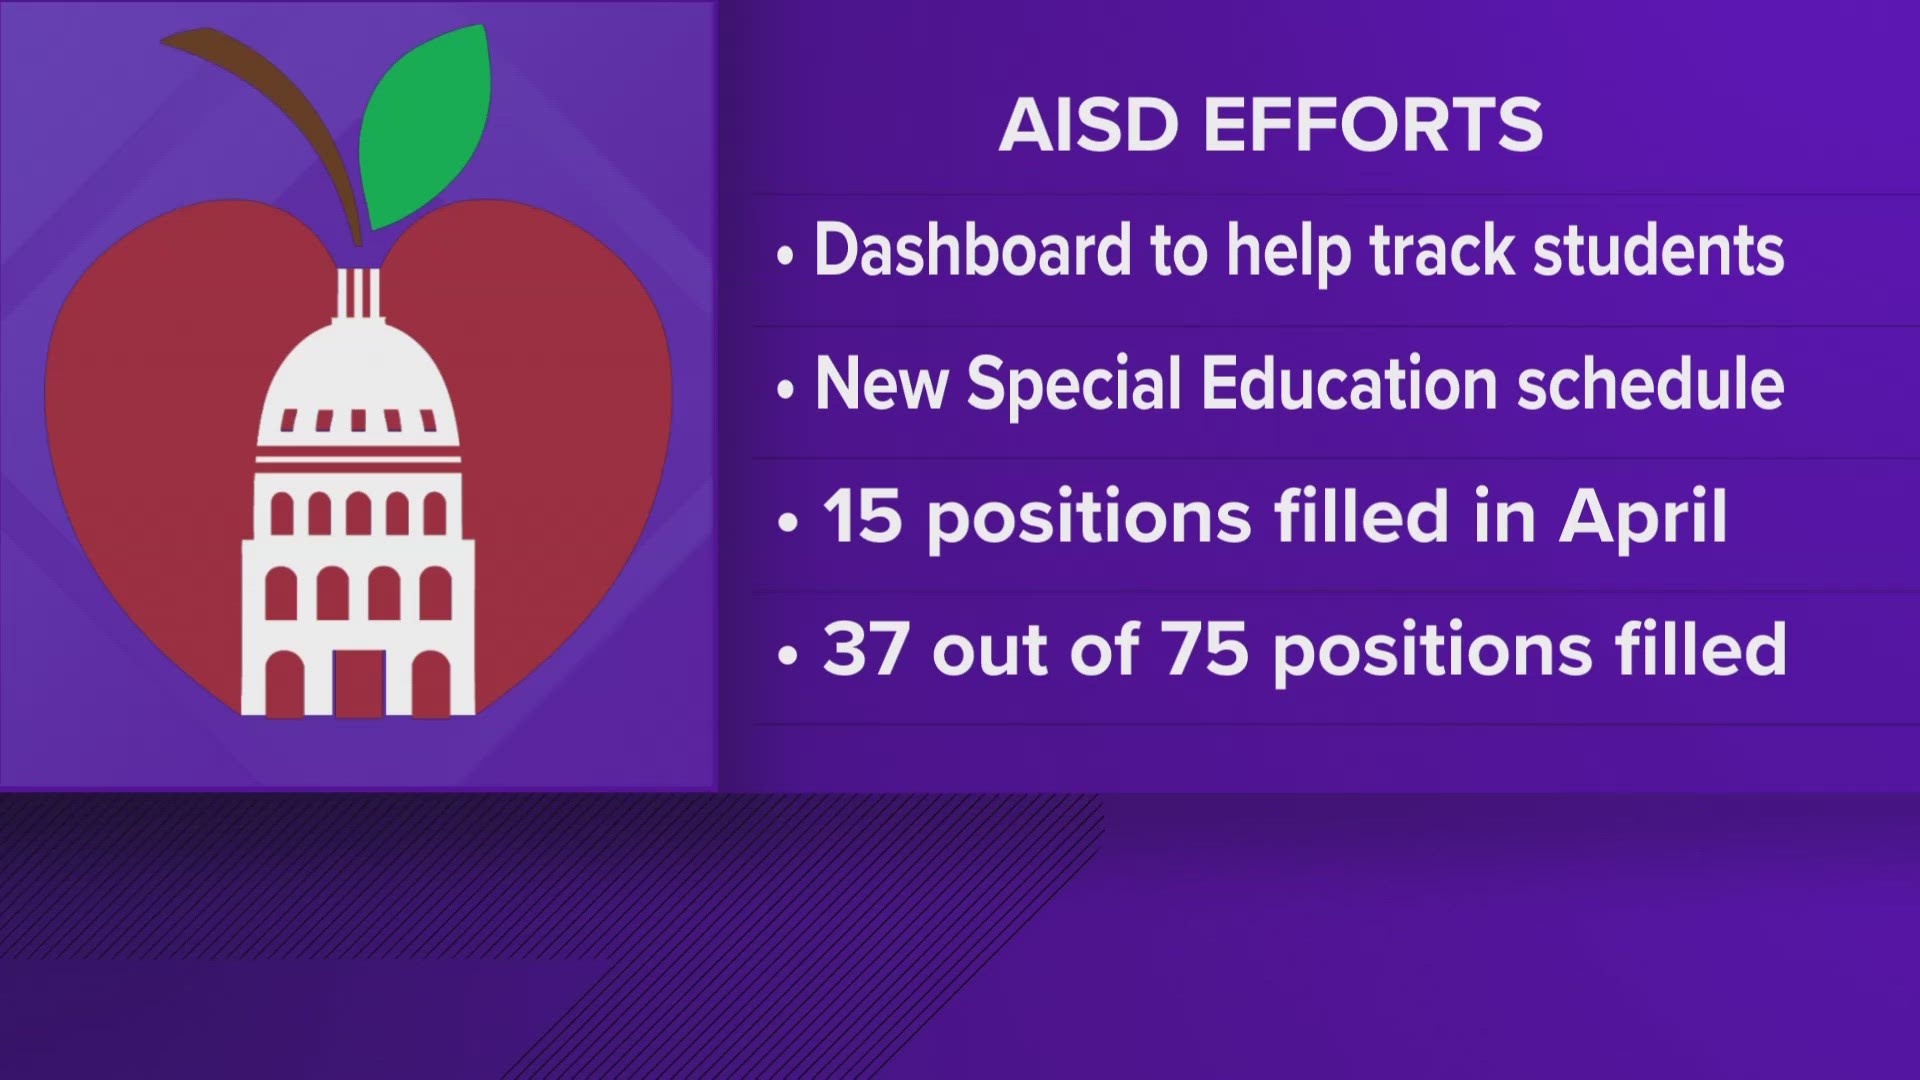 Austin ISD's interim superintendent hopes the district's ongoing efforts with its special education program will prevent state conservatorship.